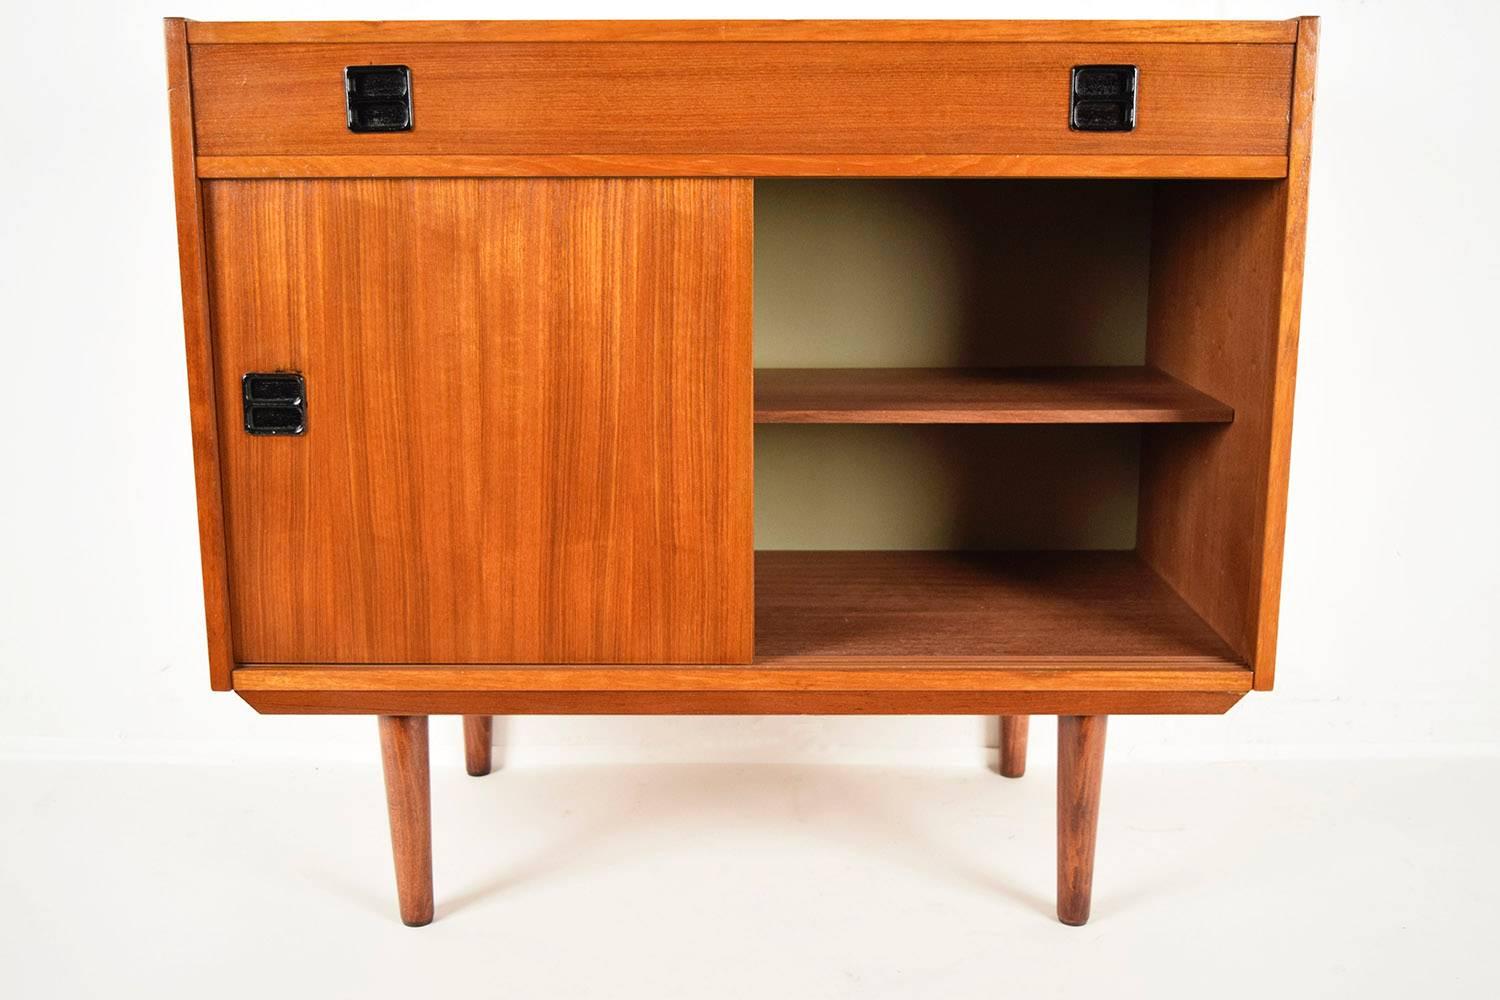 This is a 1960s Danish cabinet. Teakwood, with original Provincial color finish. Features a wooden top, followed by one large front drawer with two black color handles. Bottom has two sliding doors with black color handles and one wooden shelve